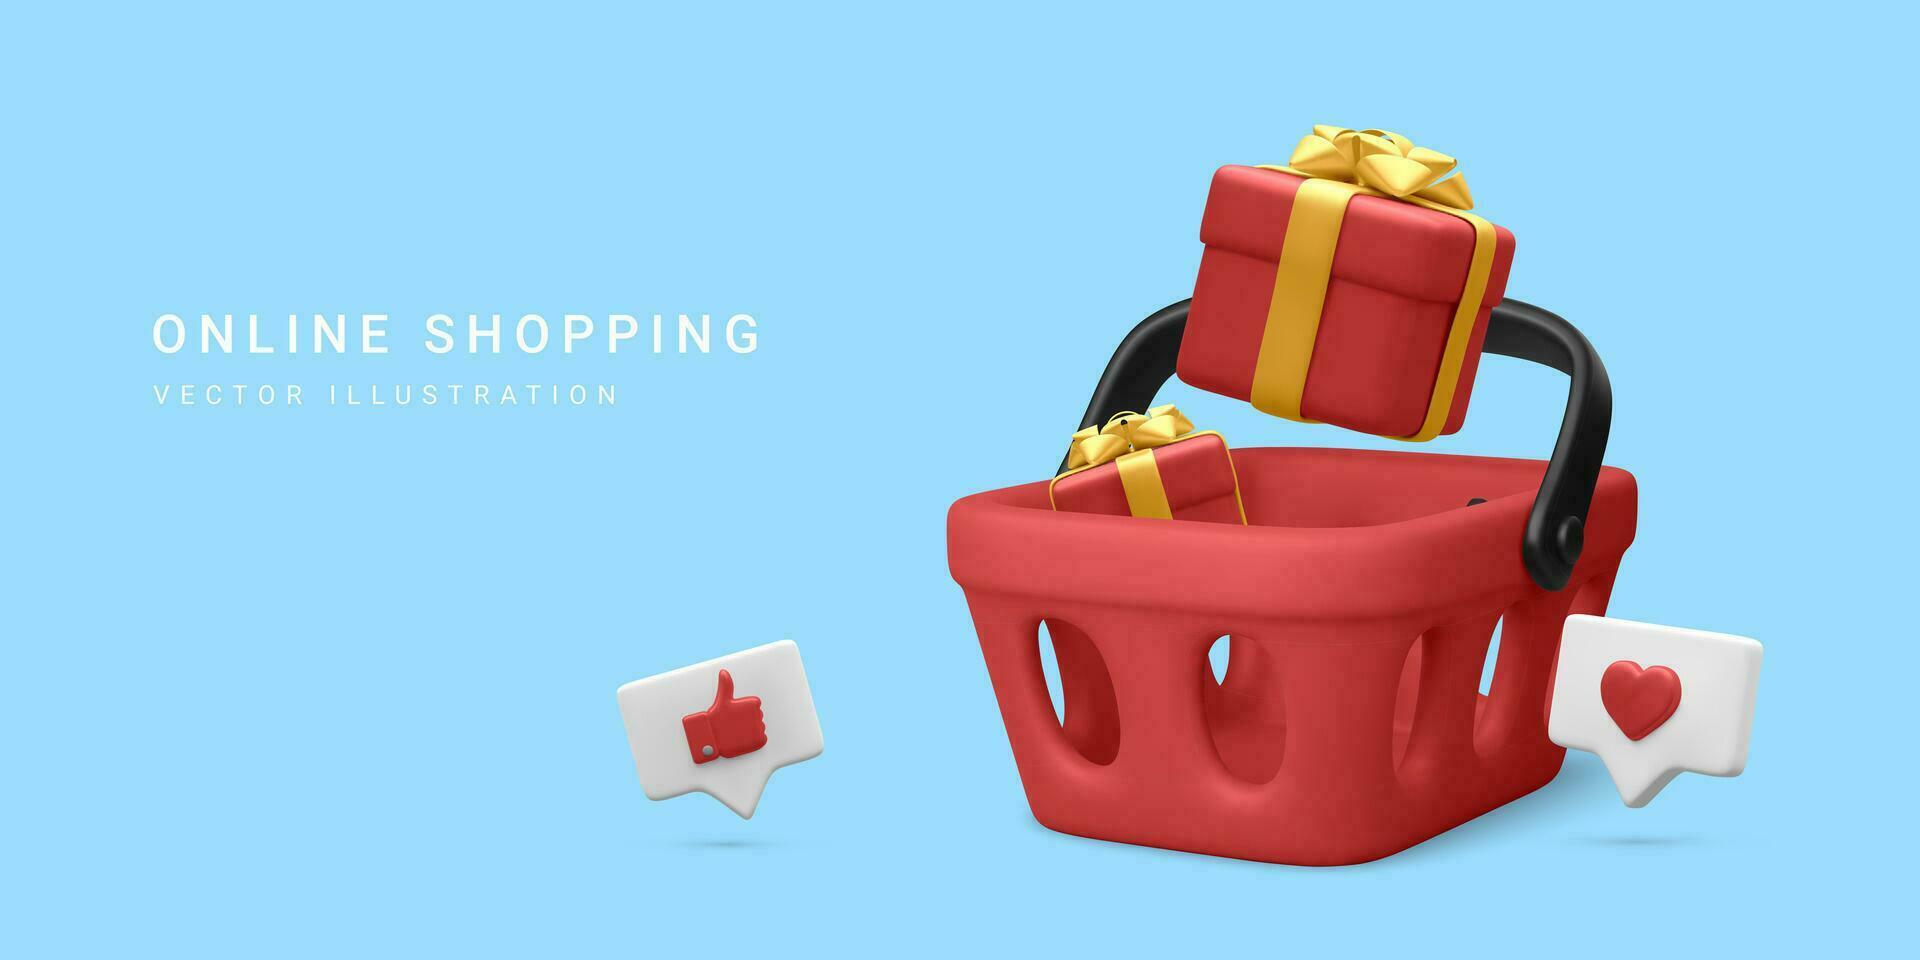 3d realistic banner with shopping basket and gift box in cartoon style on blue background. Poster or web page for online shopping. Vector illustration